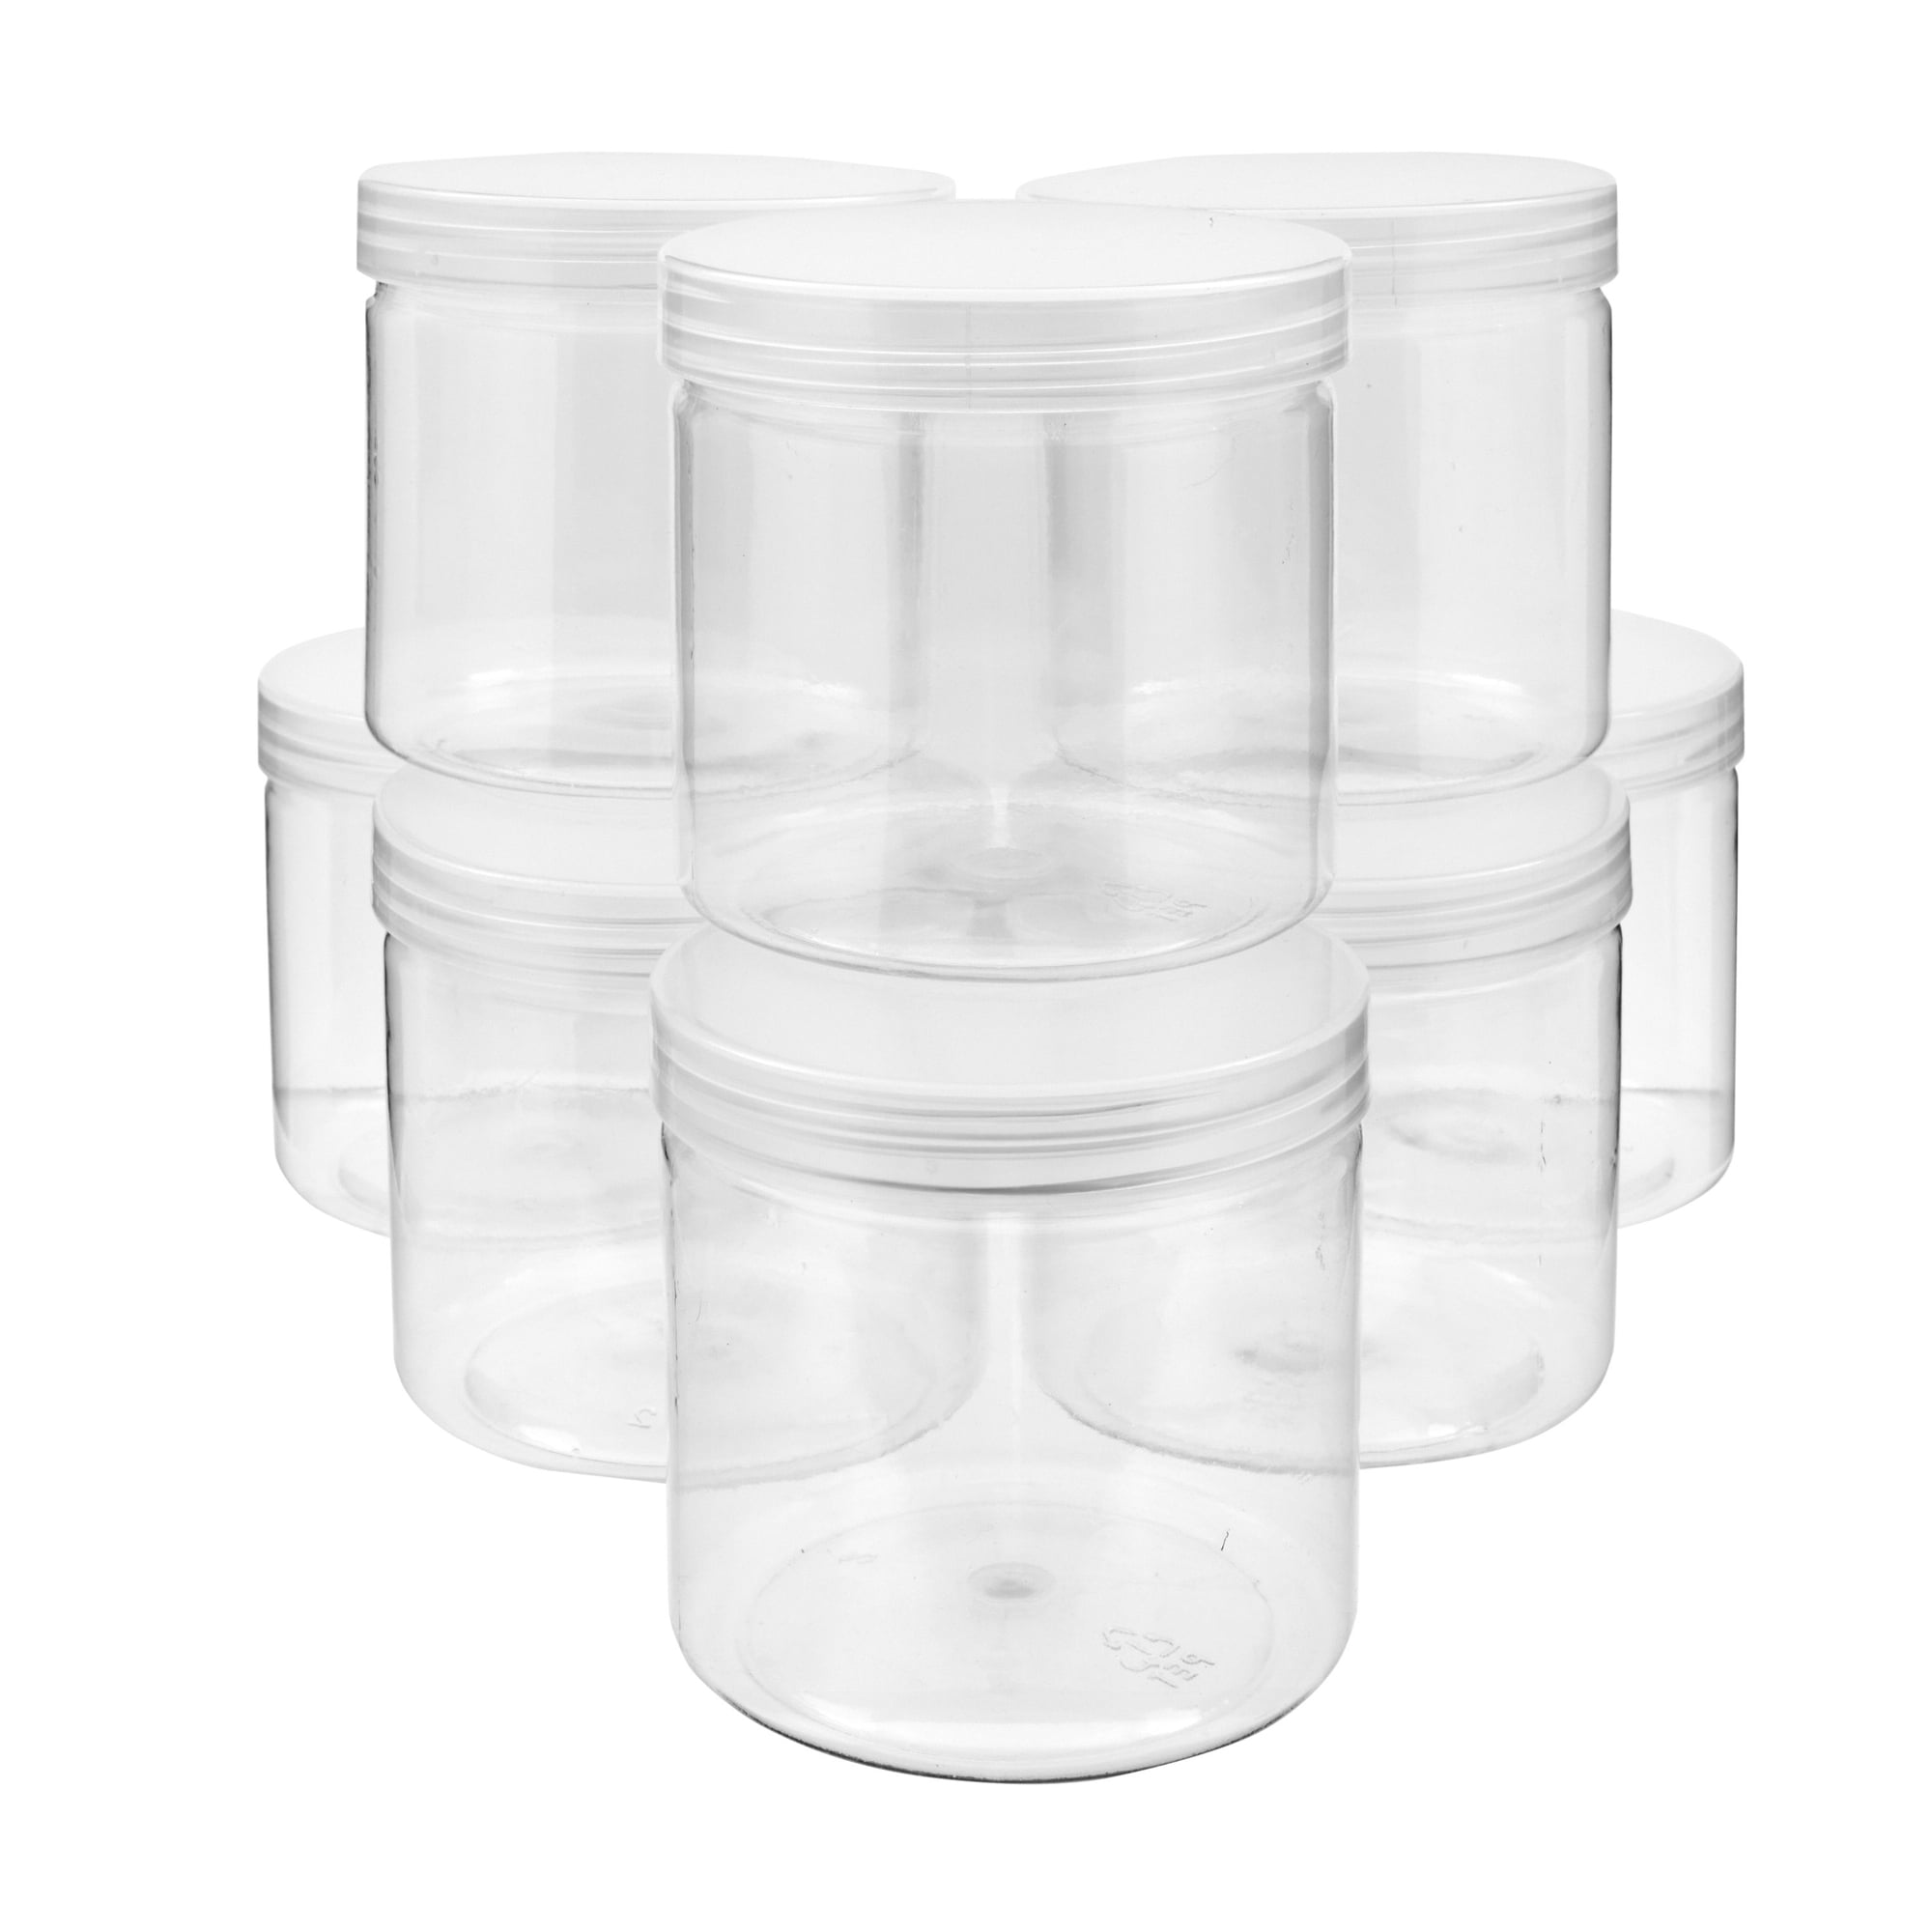 12-pack 8oz/250ml reuseable small plastic freezer storage container jars  with screw lid for food kids baby lunch snacks slime cup, Sturdy Plastic, BPA  Free, Freezer & Dishwasher Safe